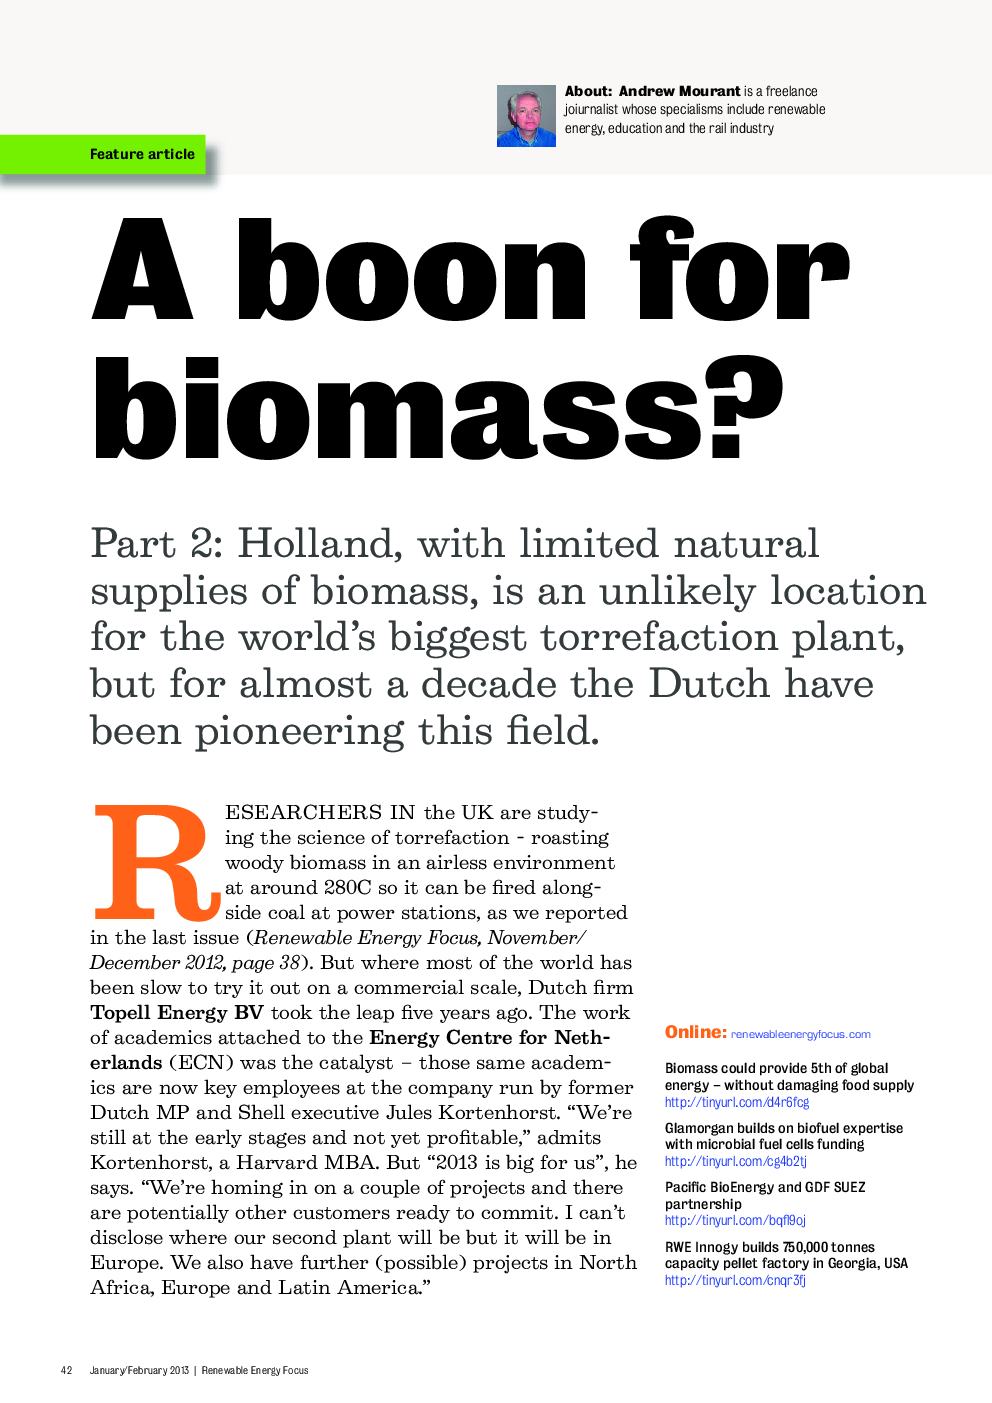 A boon for biomass?